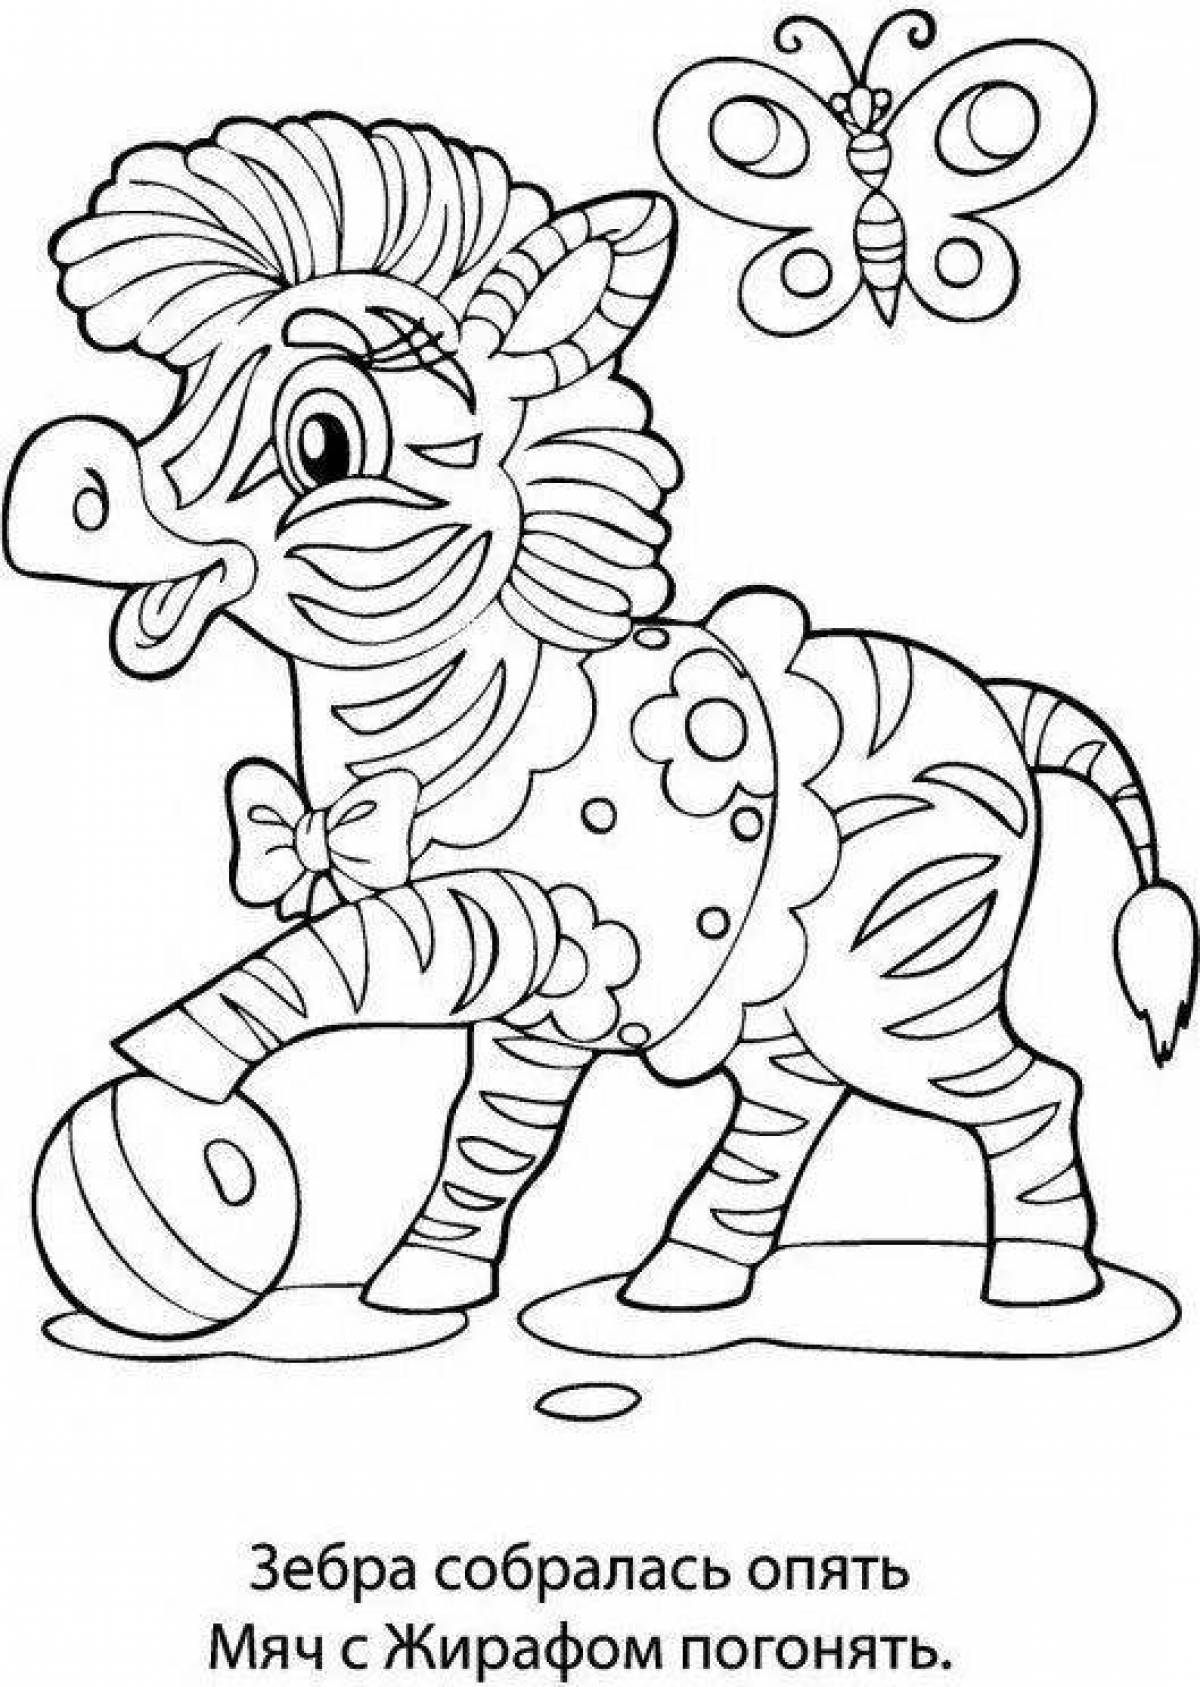 Coloring bright pink elephant